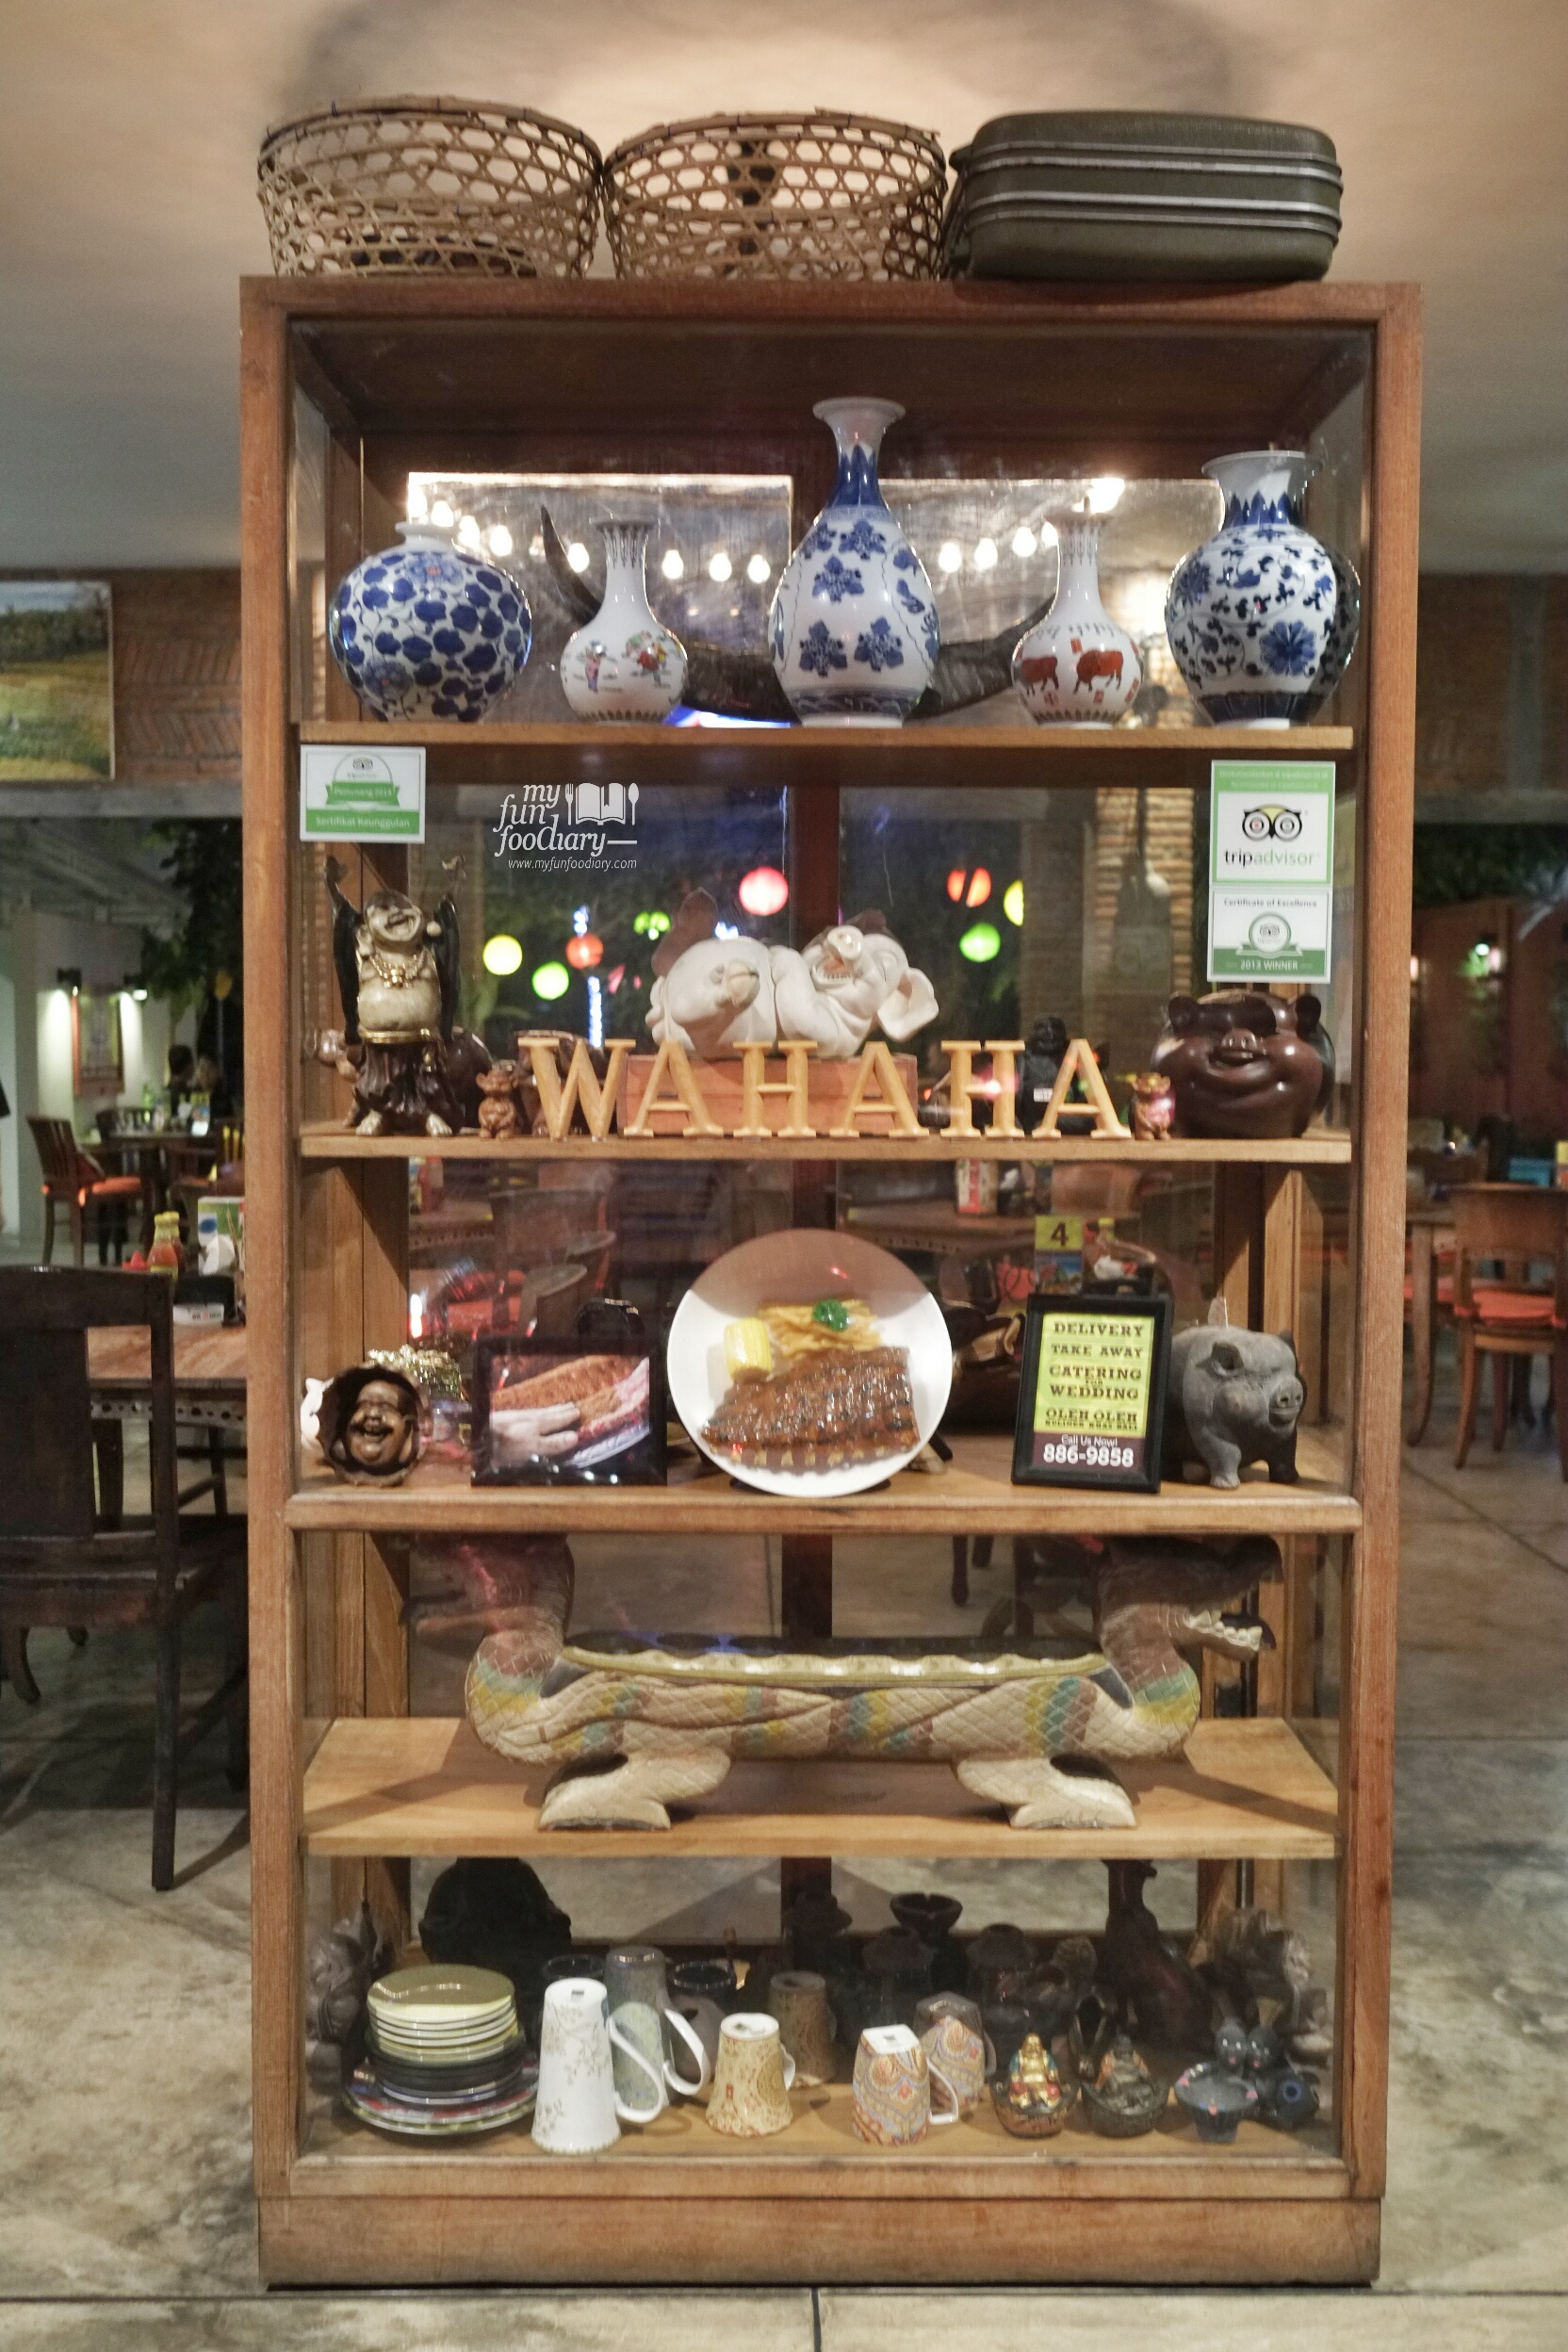 Voted as best restaurant by Trip Advisor at Wahaha Pork Ribs Bali by Myfunfoodiary